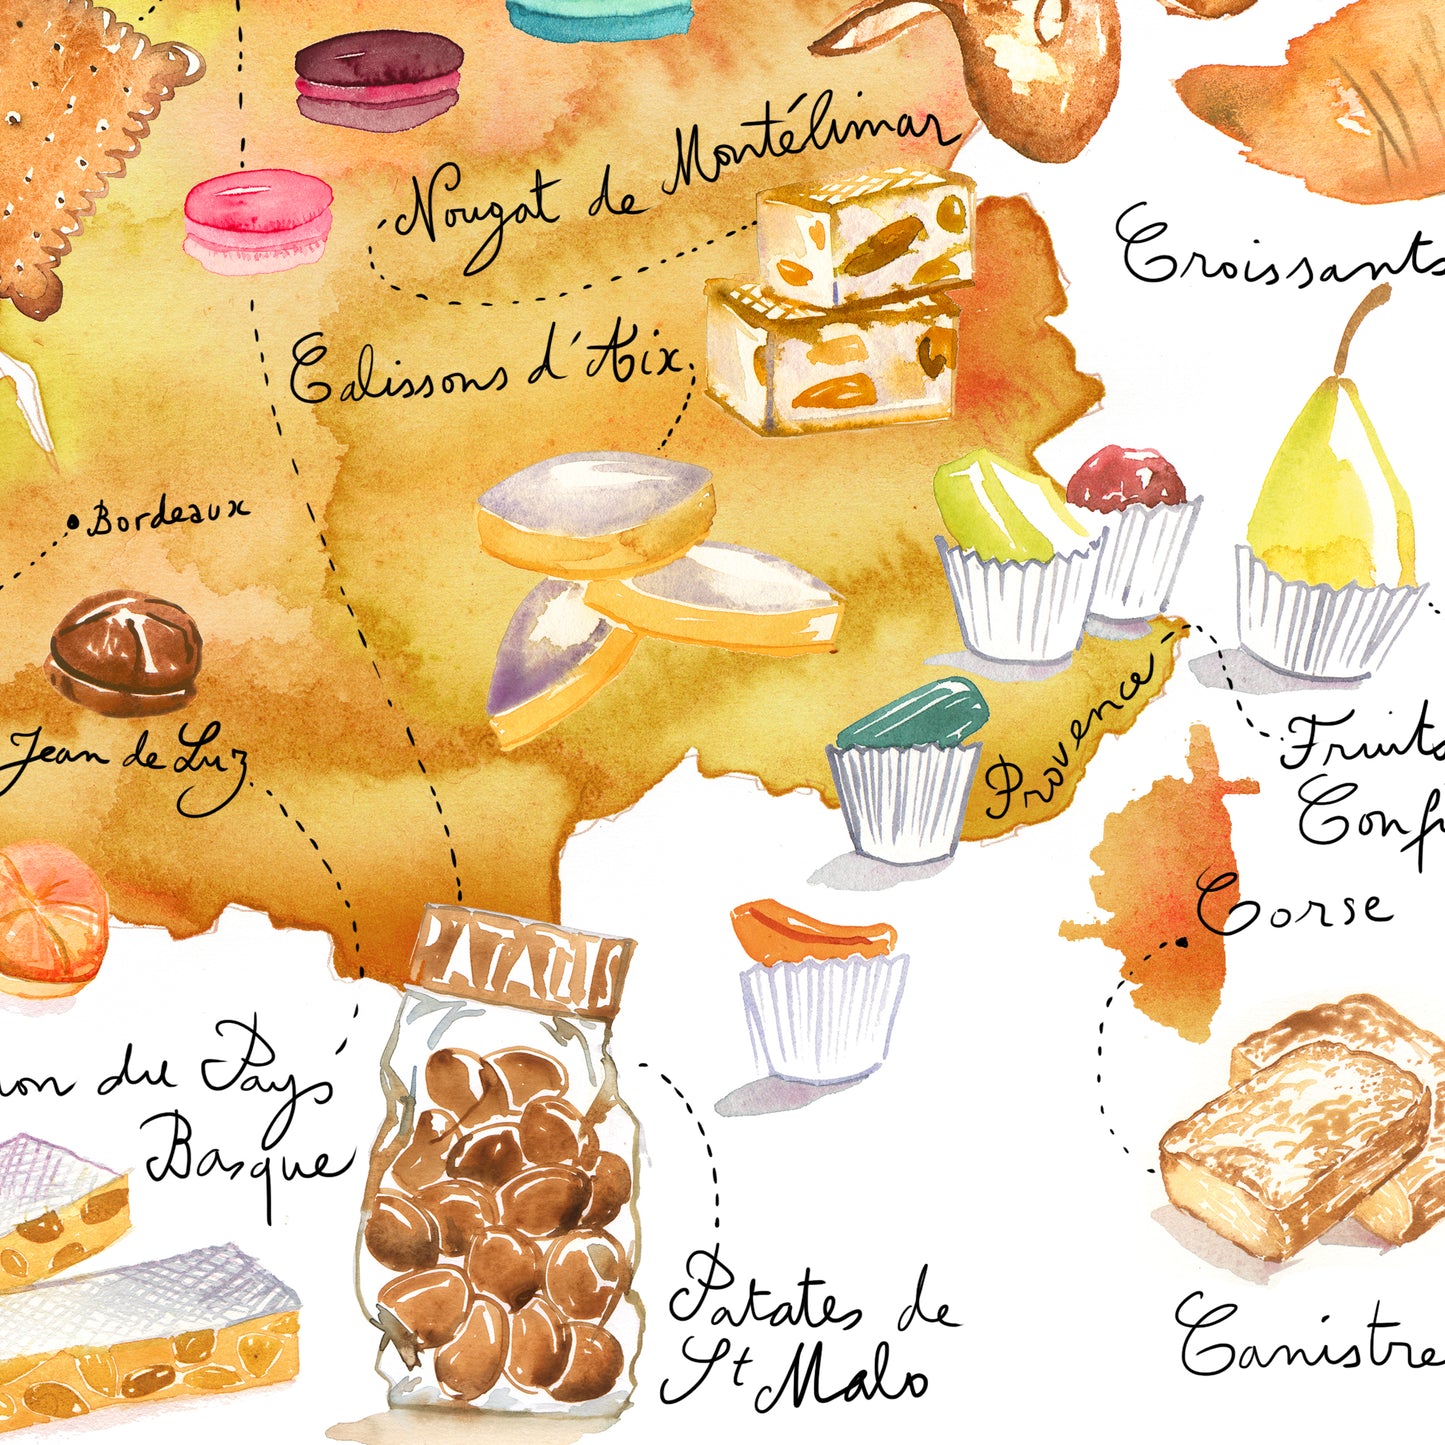 French treats - France map